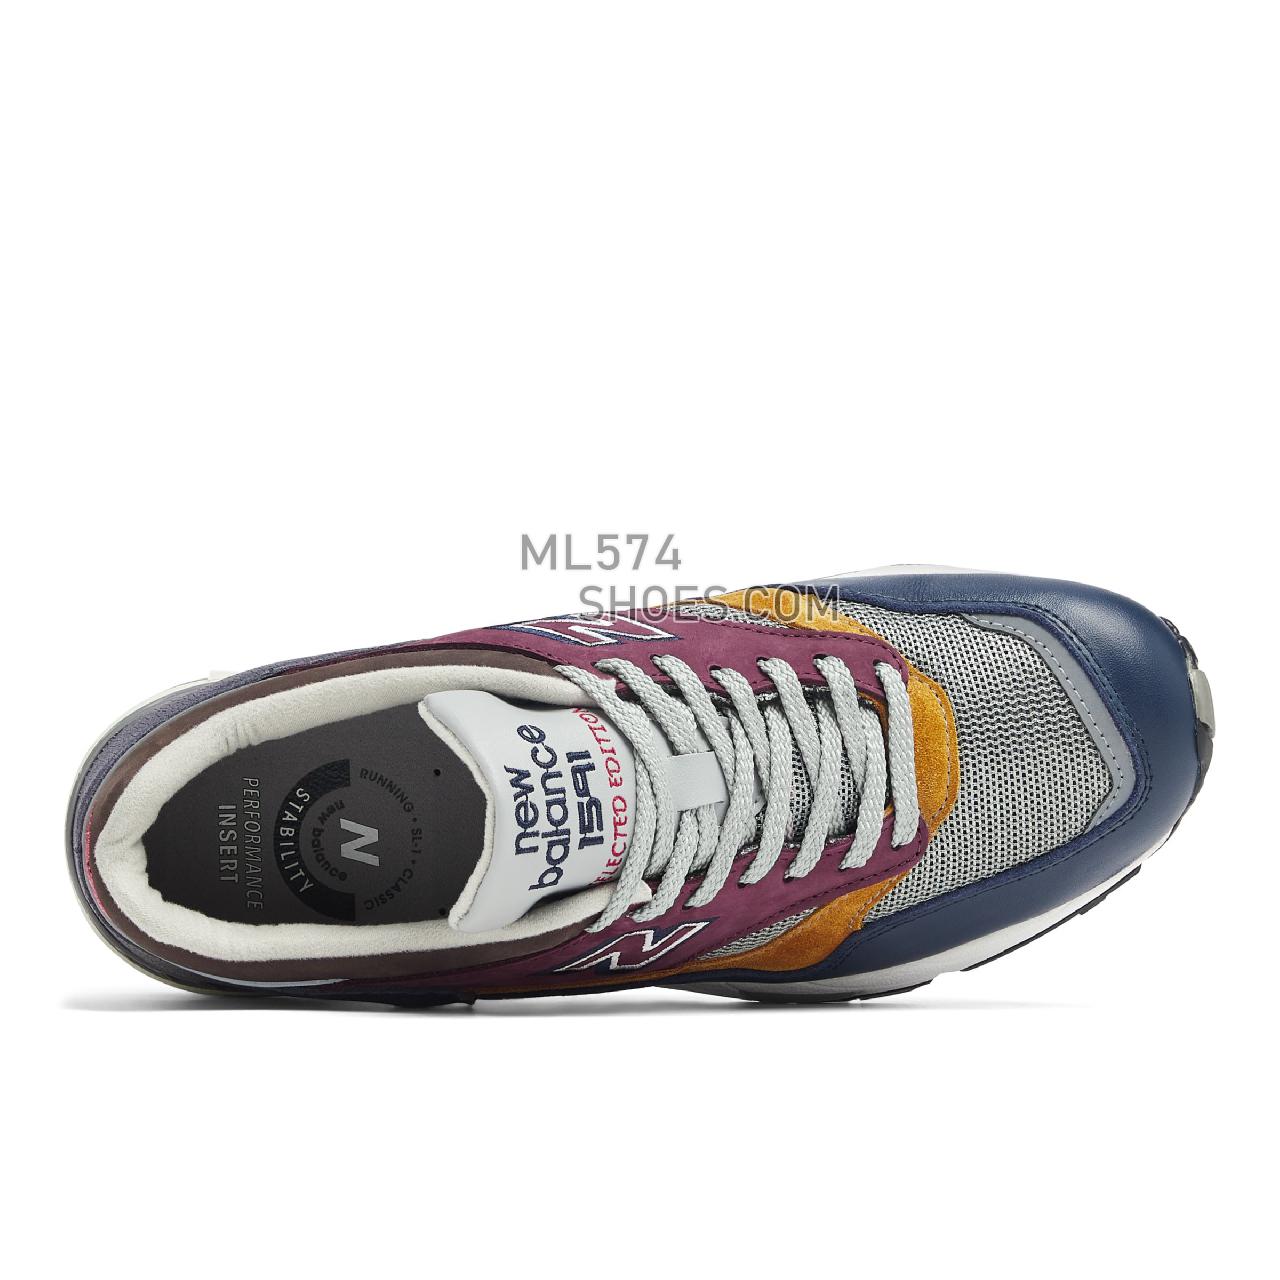 New Balance MADE UK 1591 - Men's Made in USA And UK Sneakers - Navy with grey and purple - M1591SPK